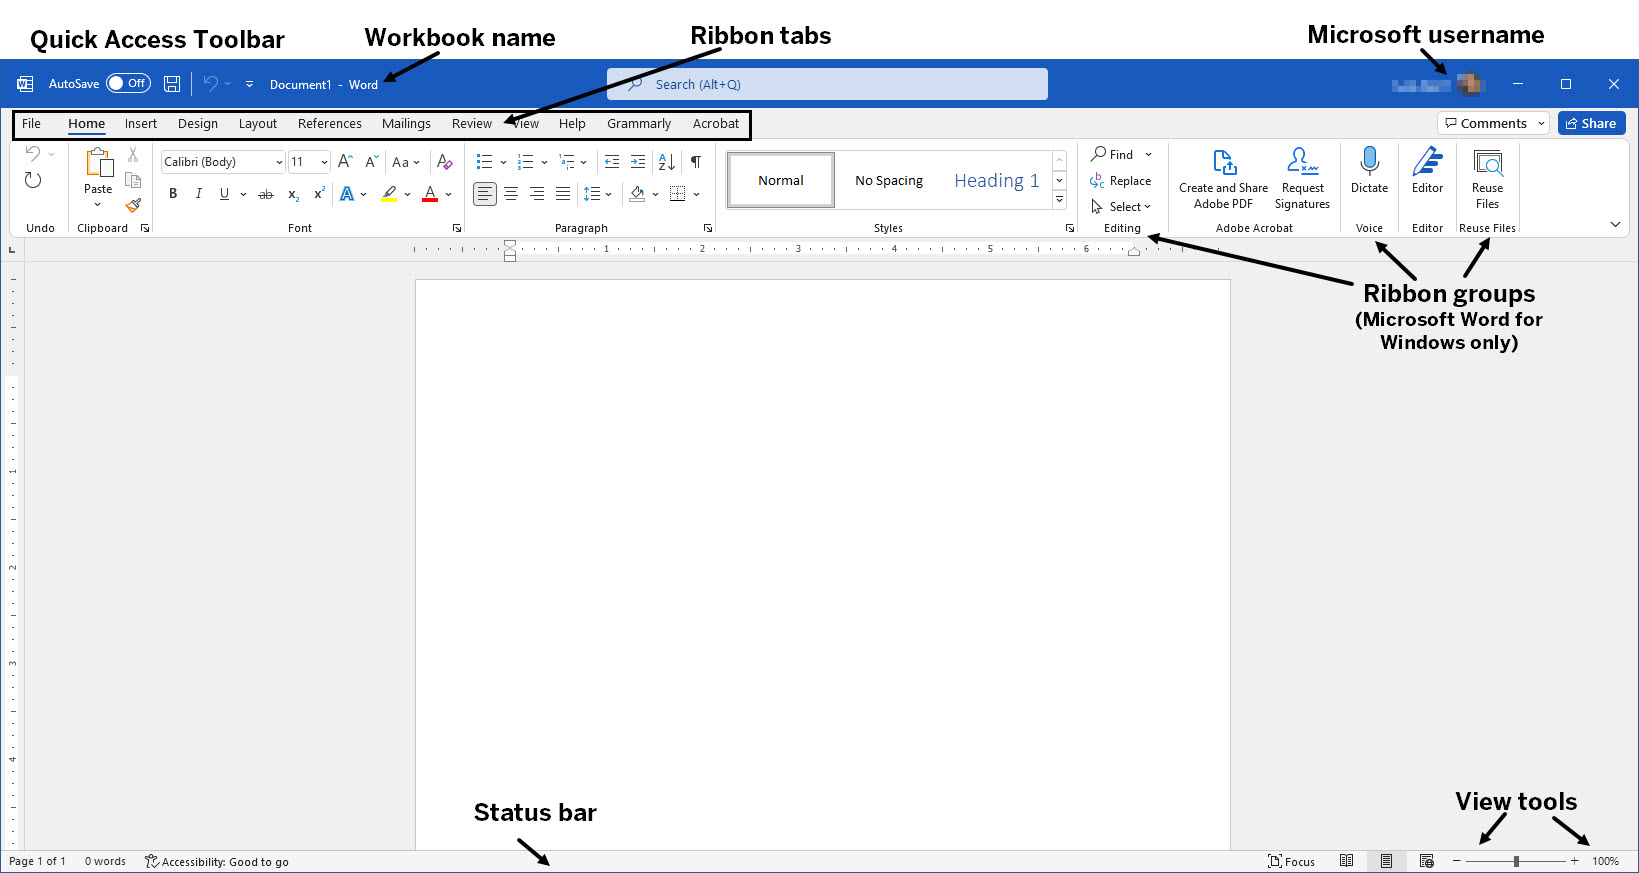 The interface of Microsoft Word for Windows. Interface elements are described below.